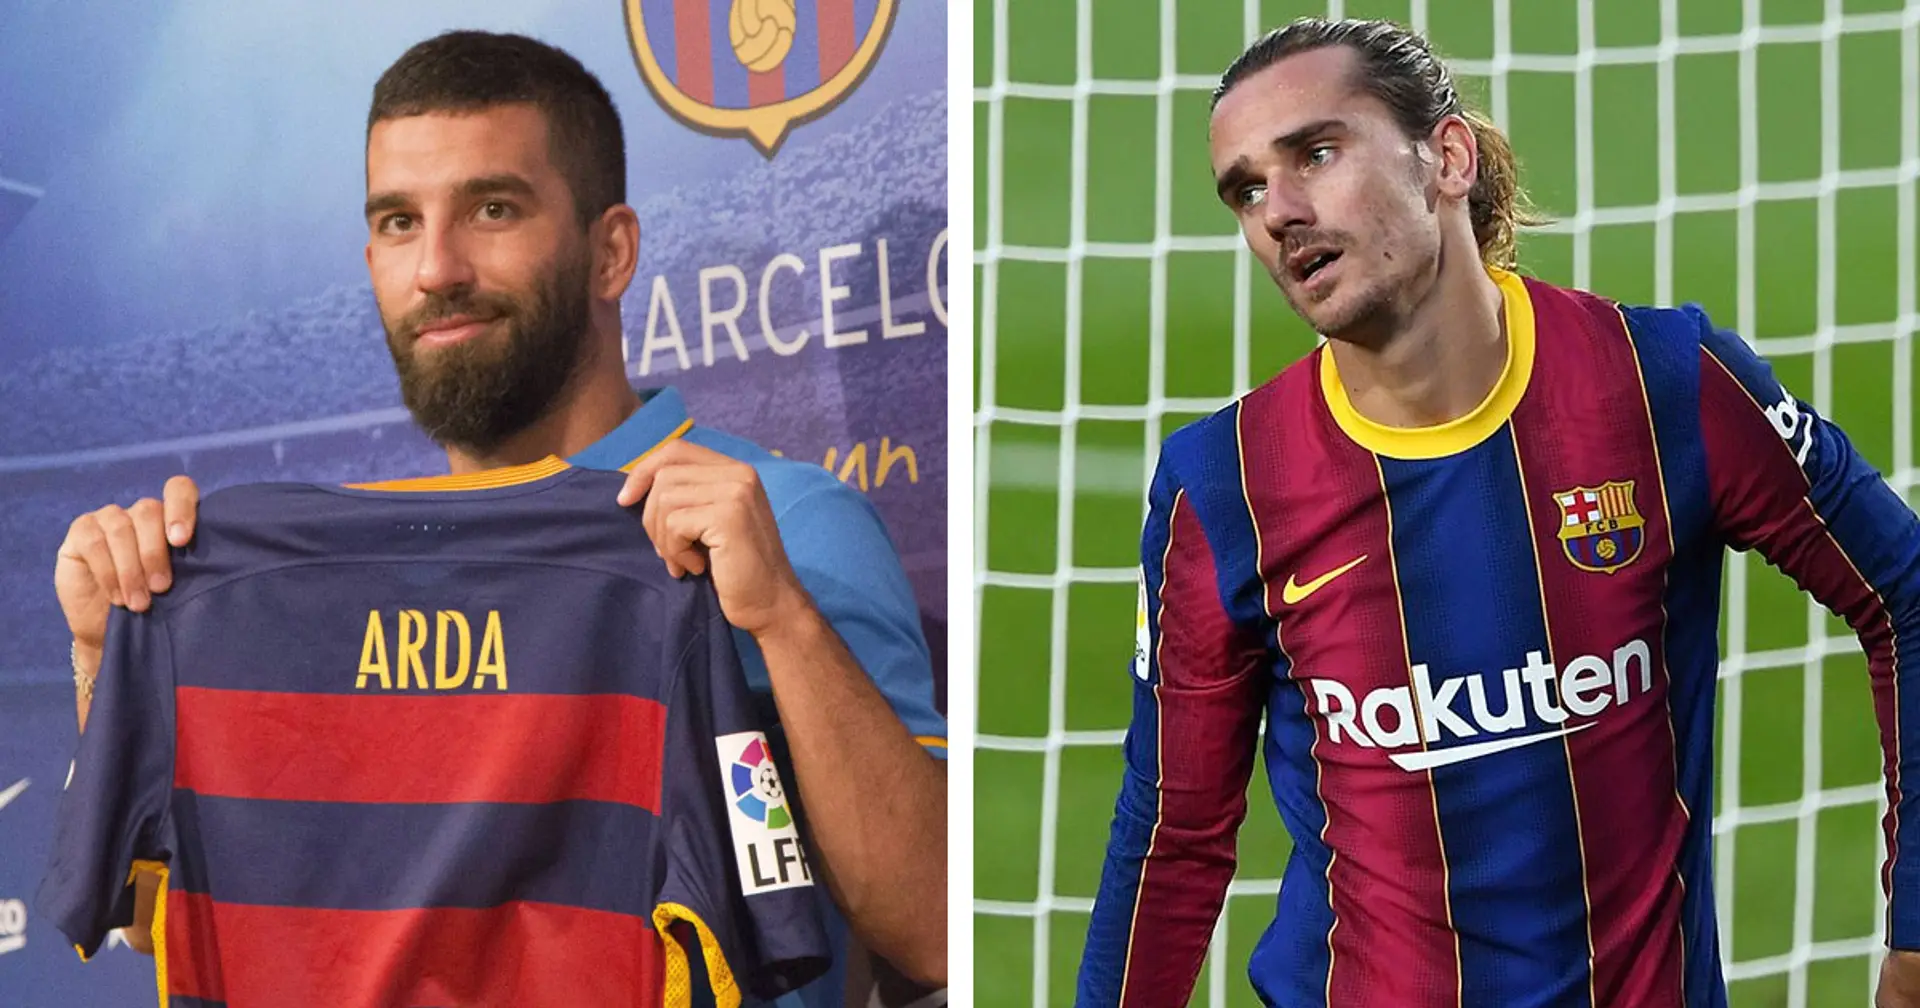 Absolute flop or different circumstances? Griezmann's Barca stats surprisingly worse than Arda Turan's